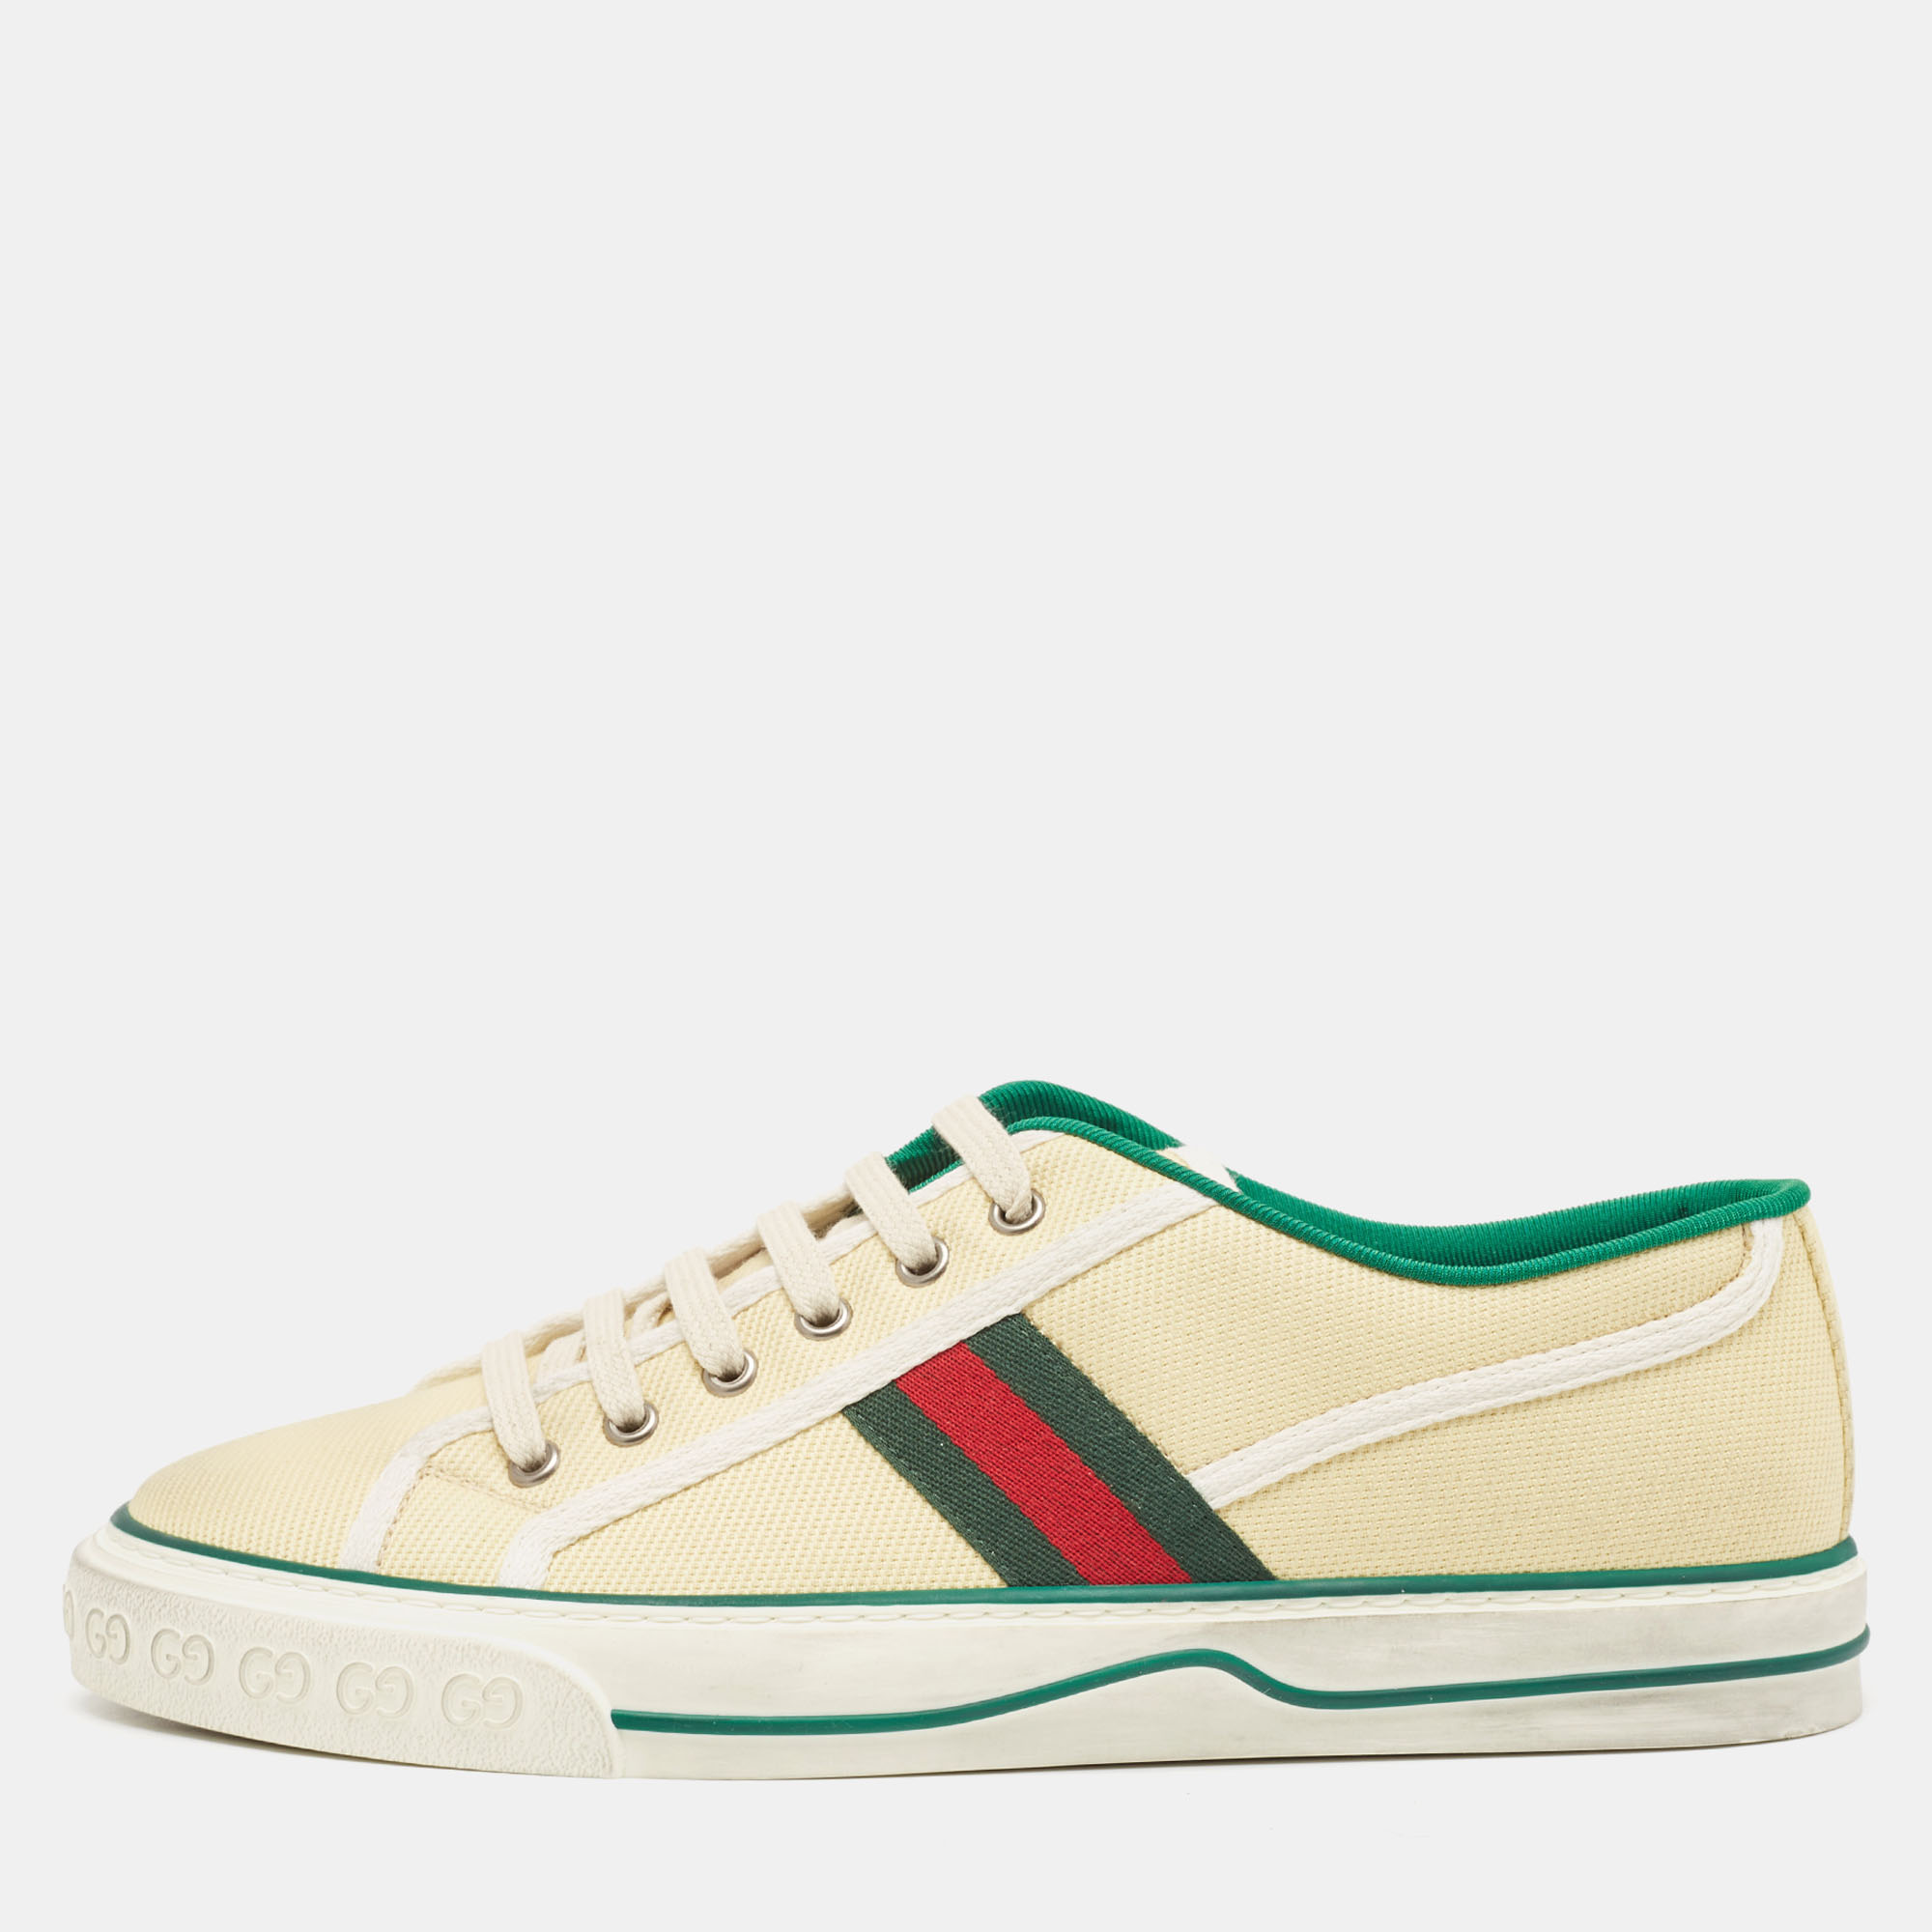 Pre-owned Gucci Cream Canvas Tennis 1977 Sneakers Size 42.5